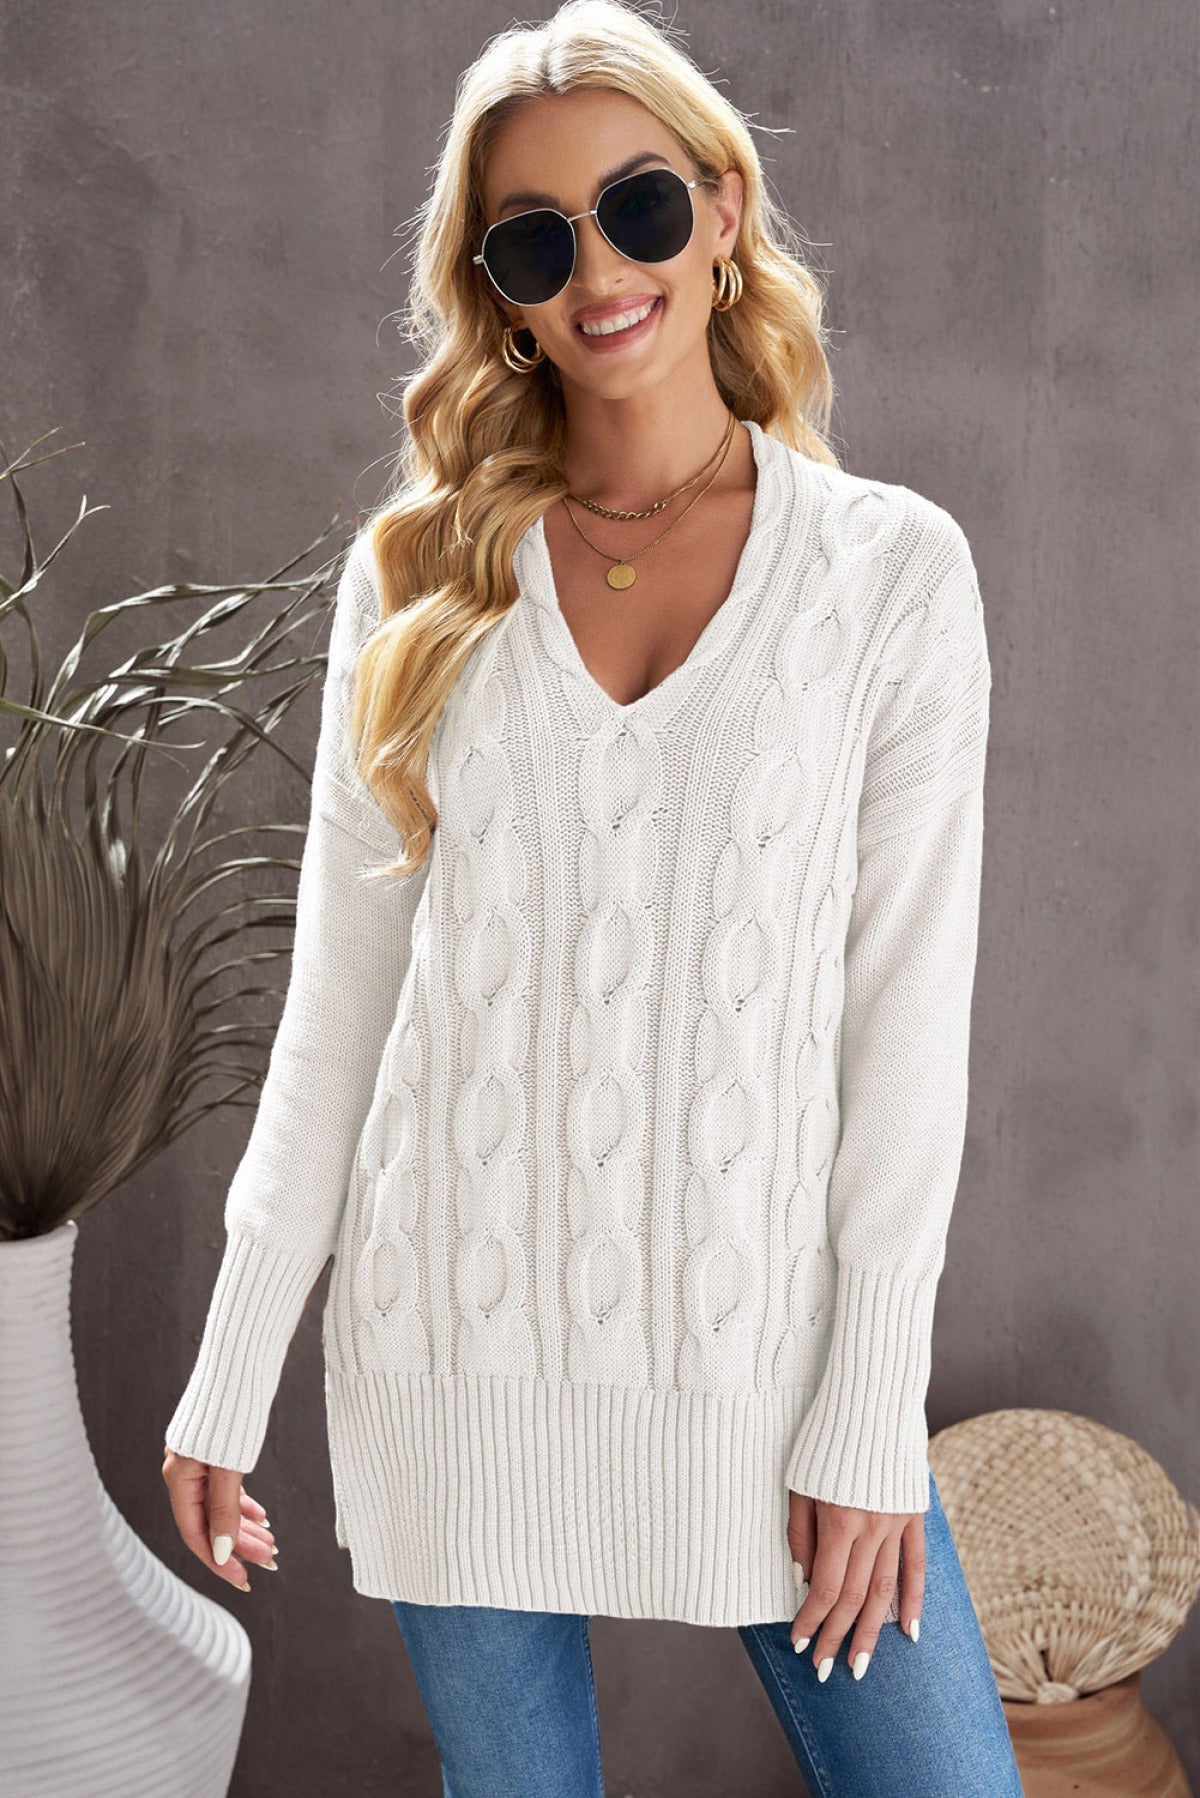 Oversized Cozy up Knit Sweater - Passion of Essence Boutique